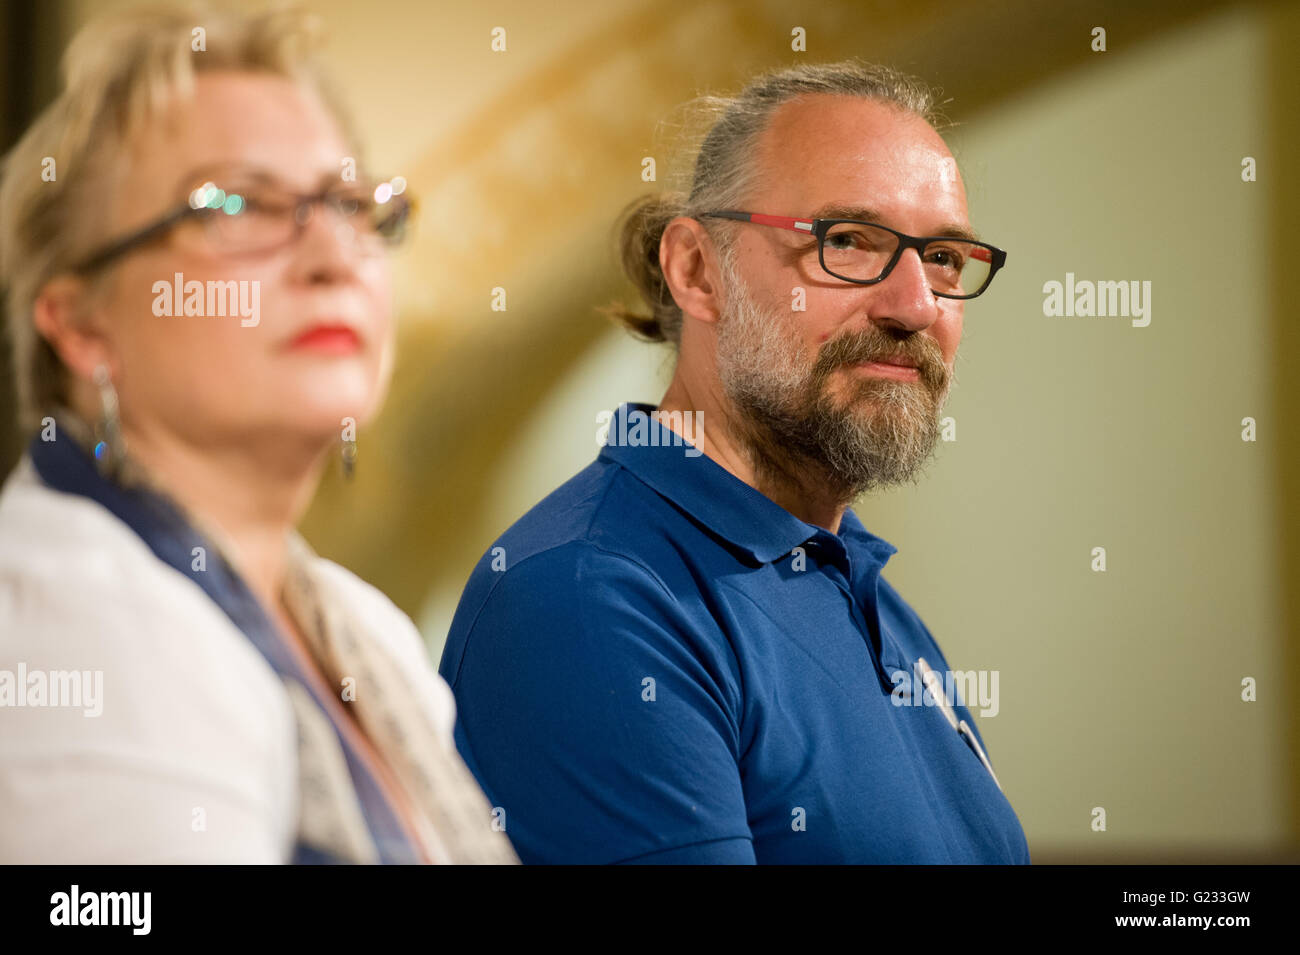 Wroclaw, Poland. 22nd May, 2016. Leader of Komitet Obrony Demokracji (Committee for the Defence of Democracy), Mateusz Kijowski, pictured during meeting with his supporters in Wroclaw.  Credit: Marcin Rozpedowski/Alamy Live News Stock Photo